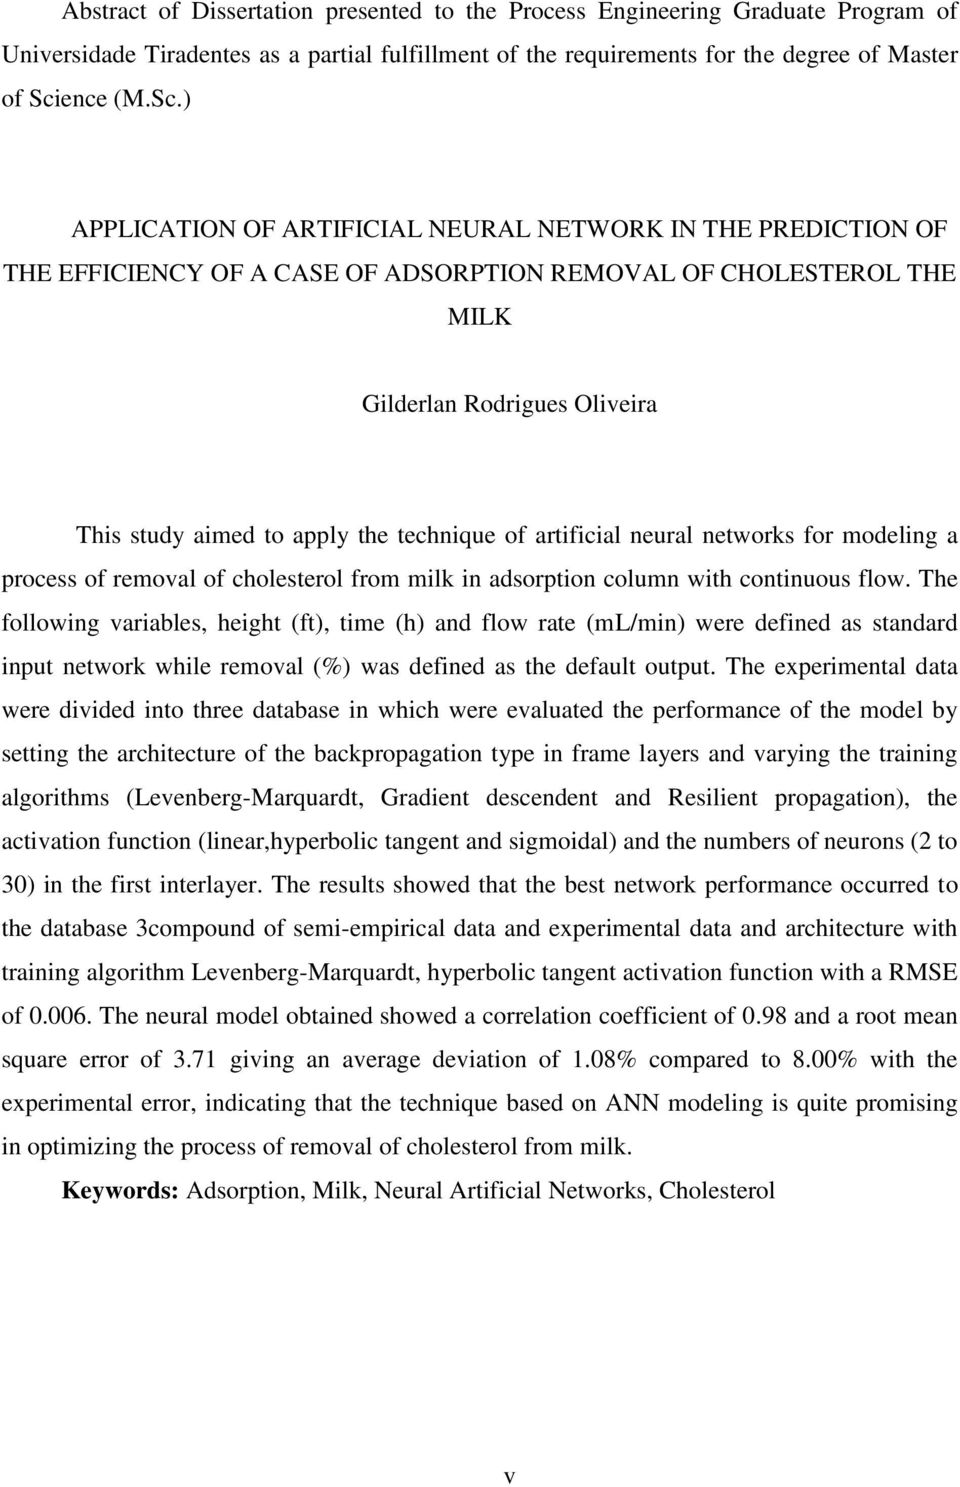 ) APPLICATION OF ARTIFICIAL NEURAL NETWORK IN THE PREDICTION OF THE EFFICIENCY OF A CASE OF ADSORPTION REMOVAL OF CHOLESTEROL THE MILK Gilderlan Rodrigues Oliveira This study aimed to apply the